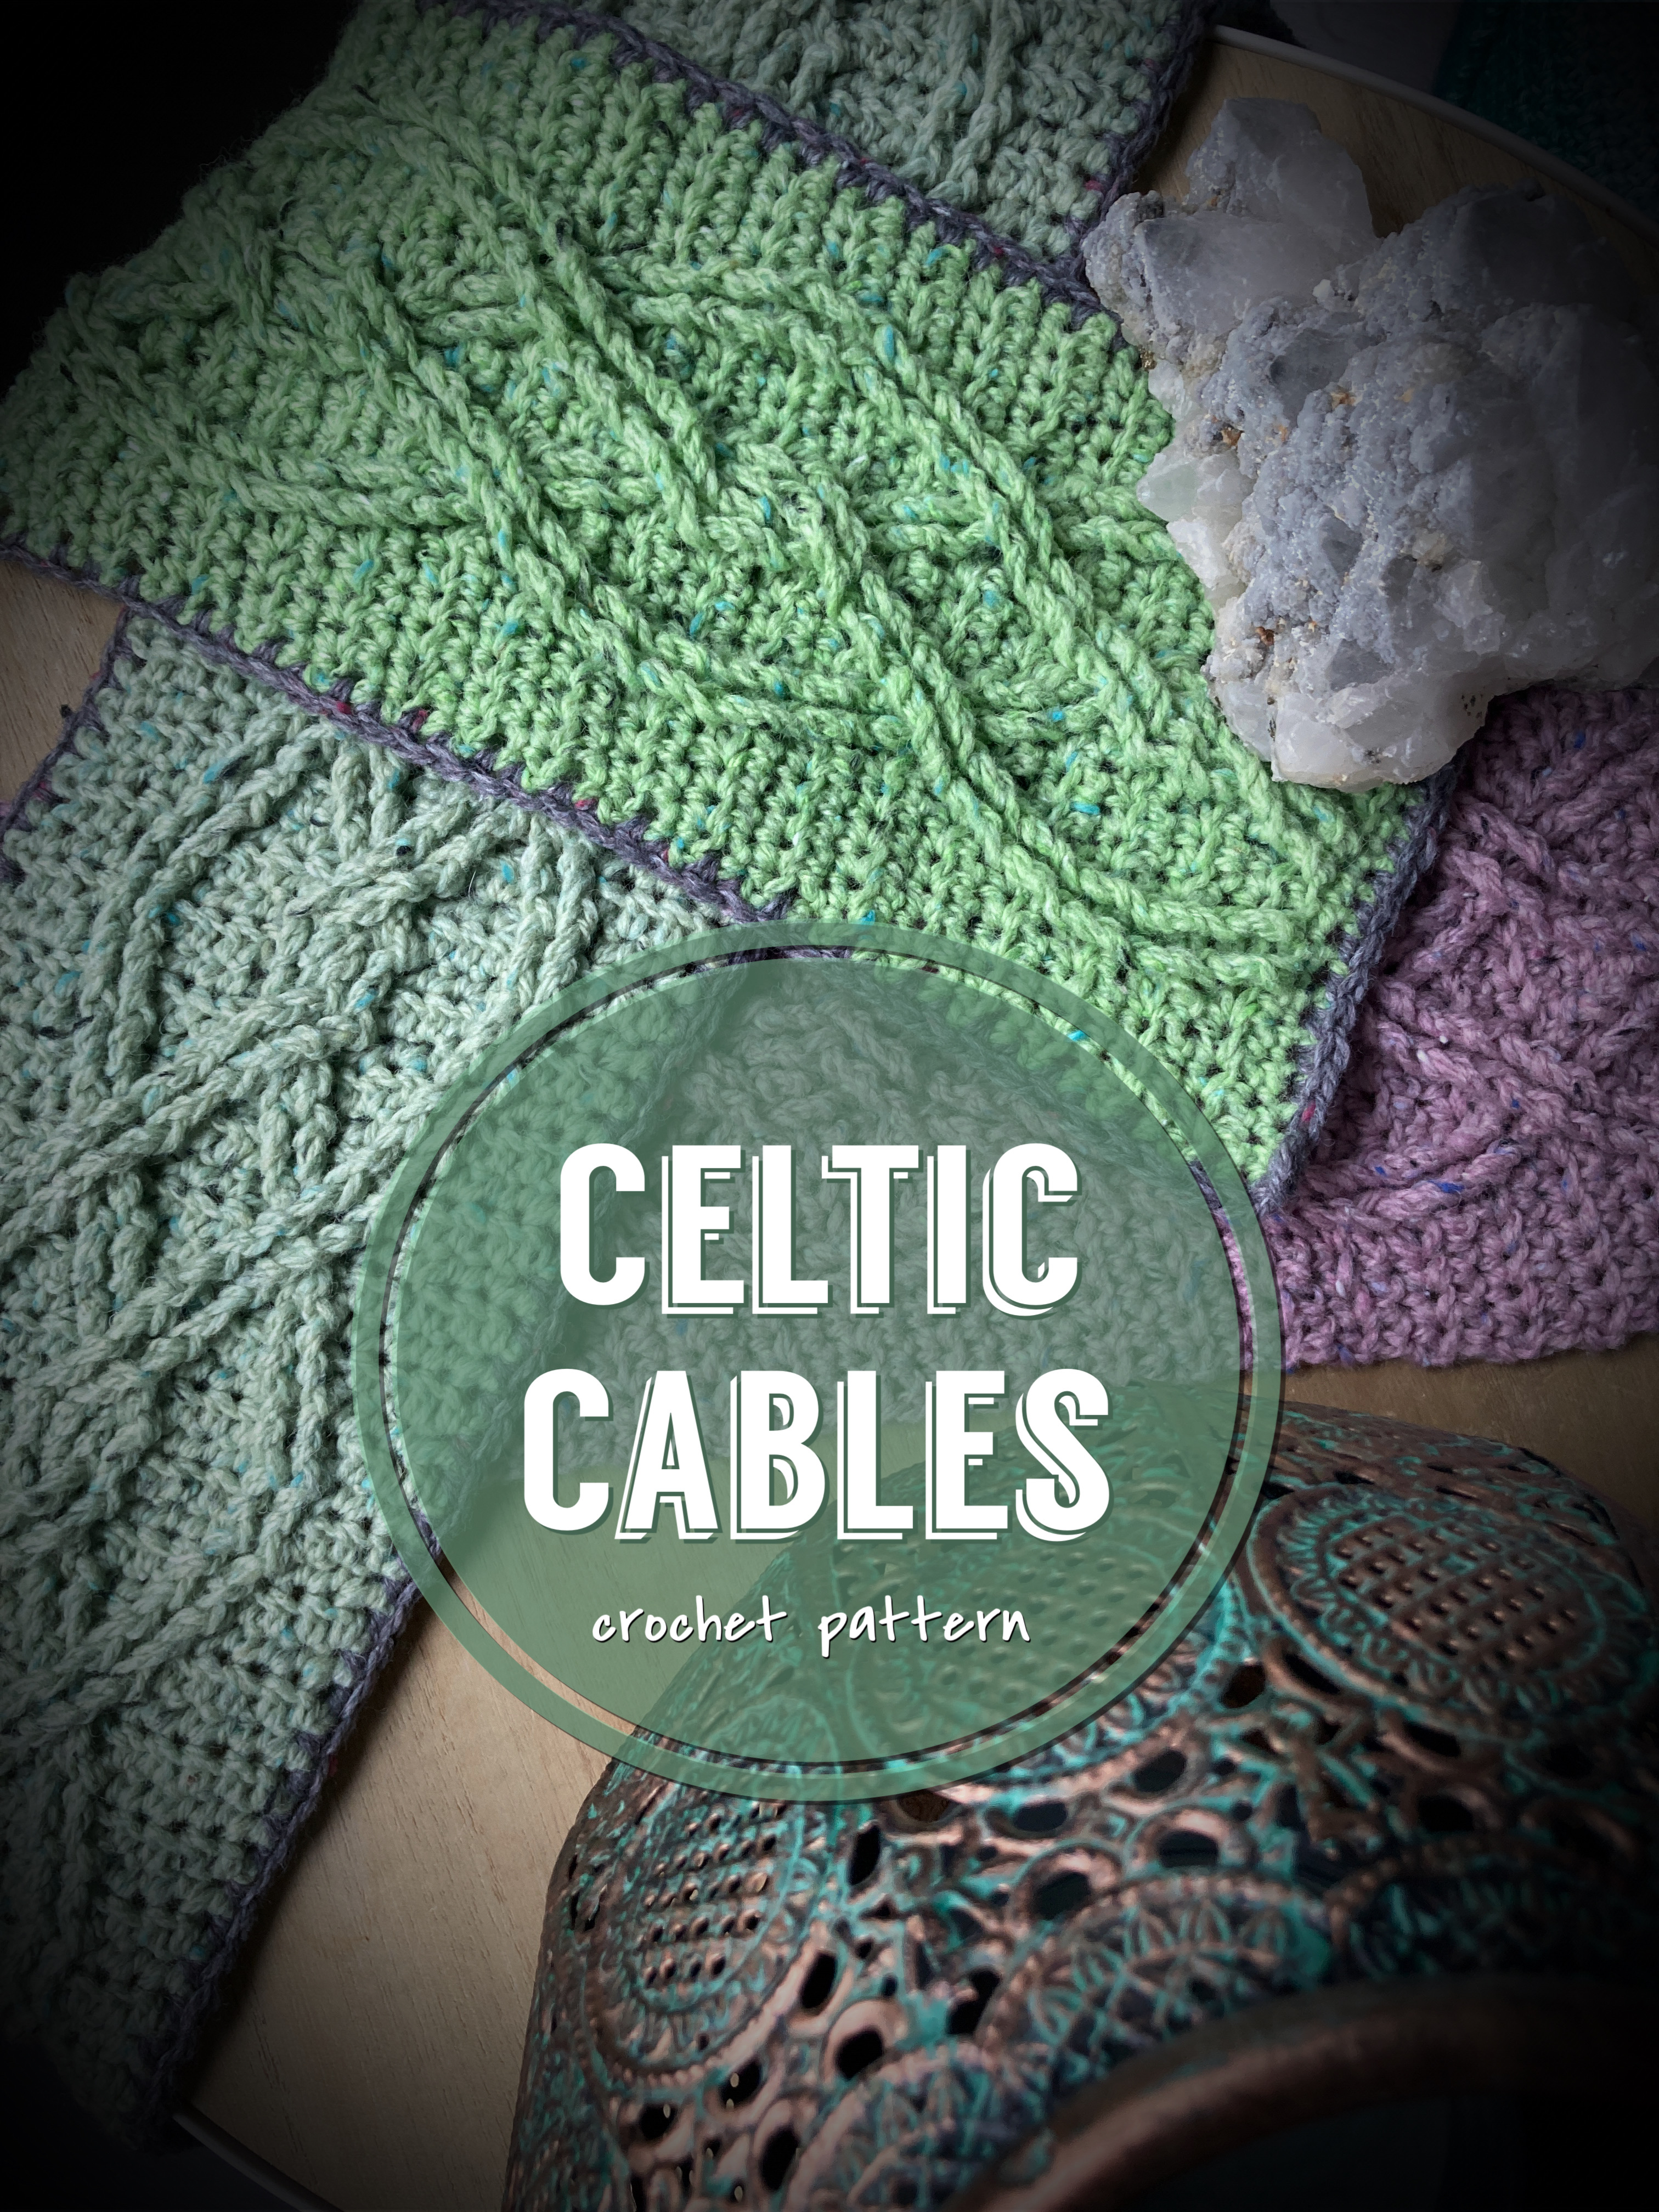 Celtic Cables pattern is out now (free pattern)…